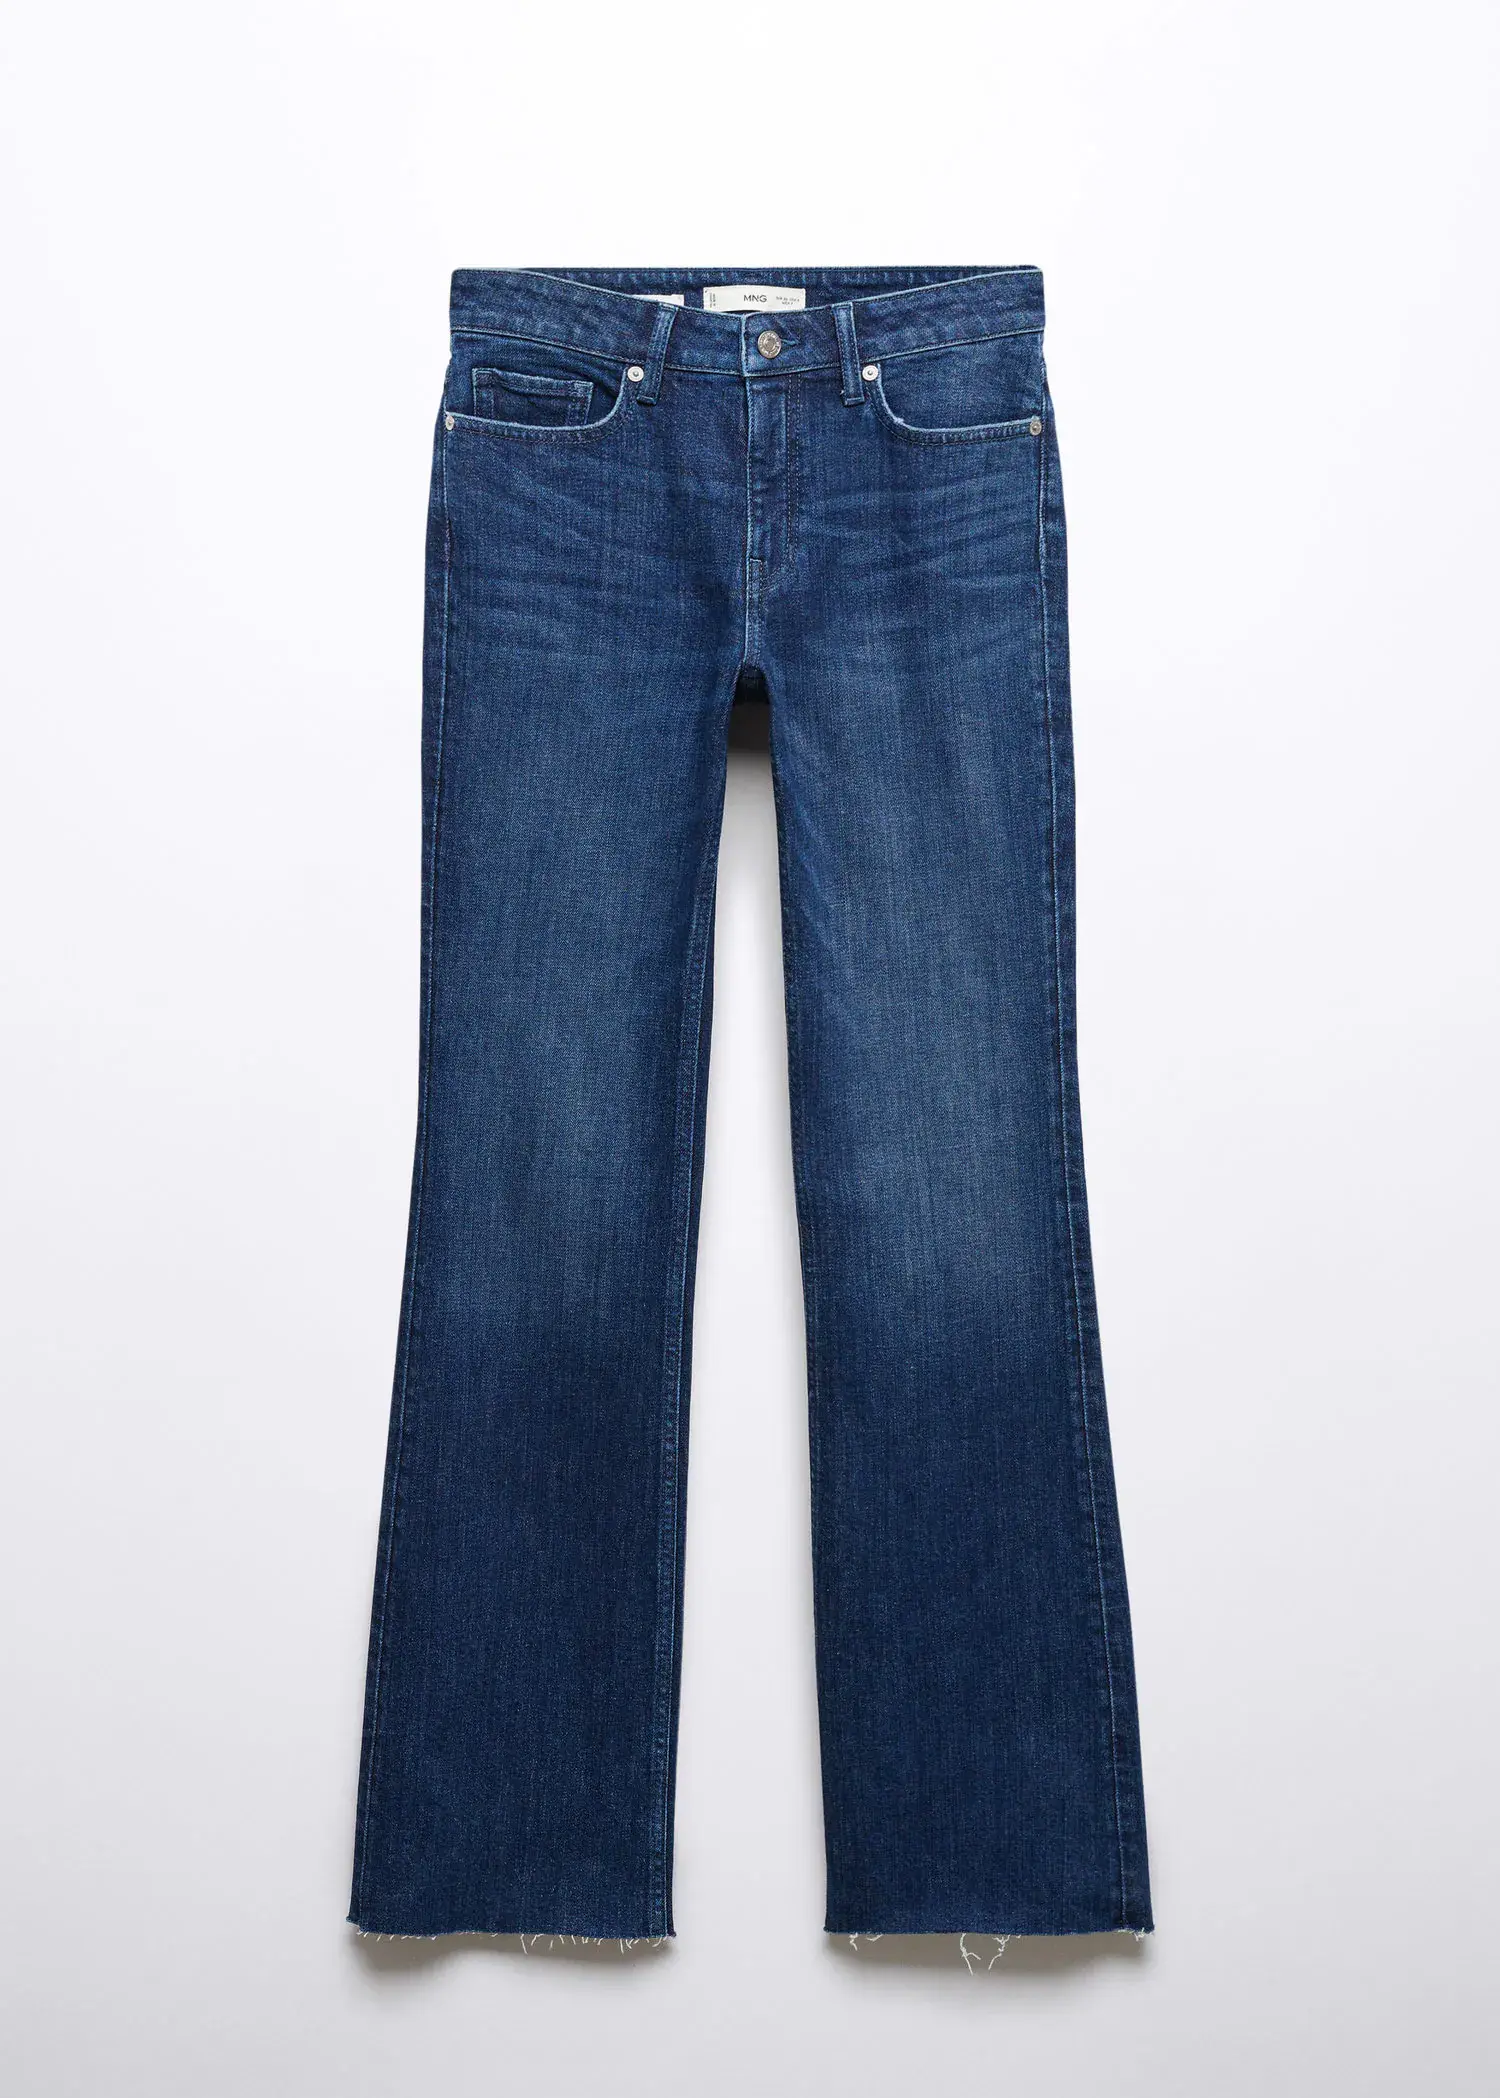 Mango Jeans flare taille normale. 1